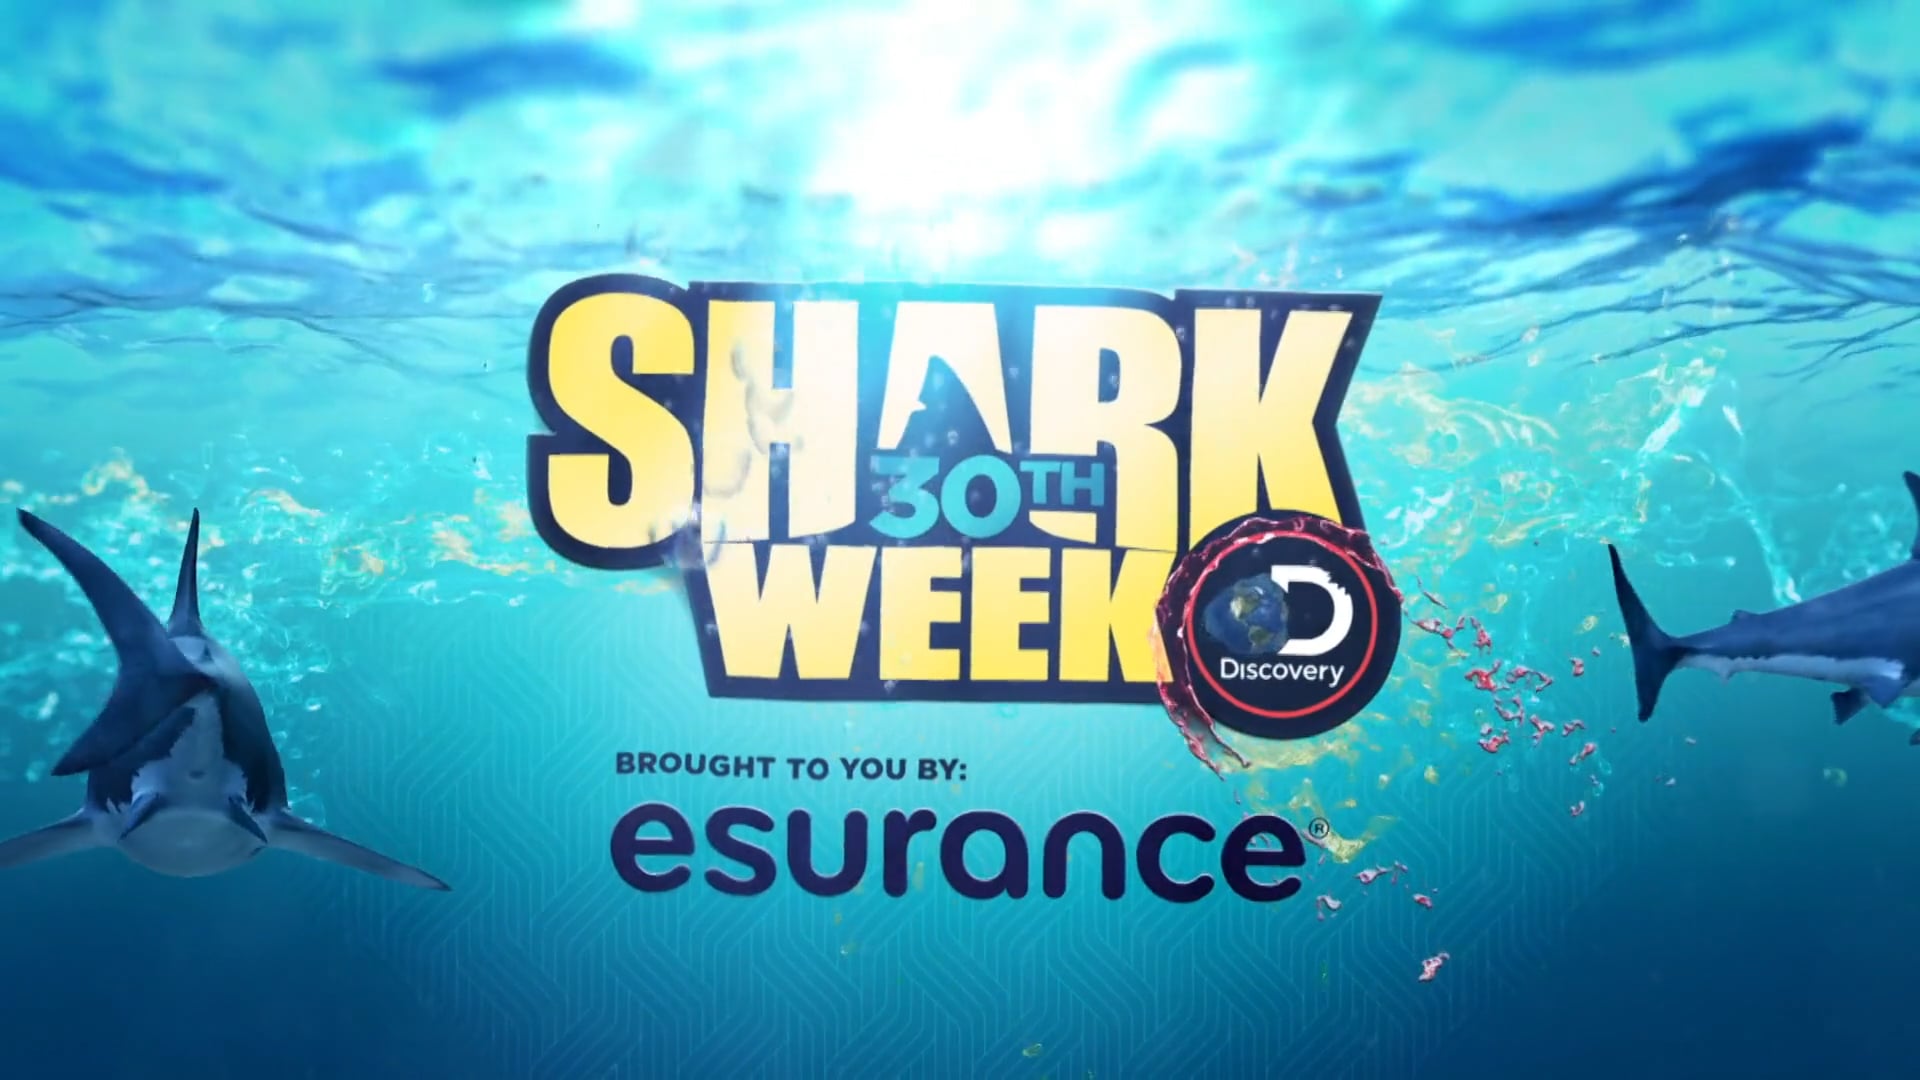 Discovery Channel Shark Week on Vimeo